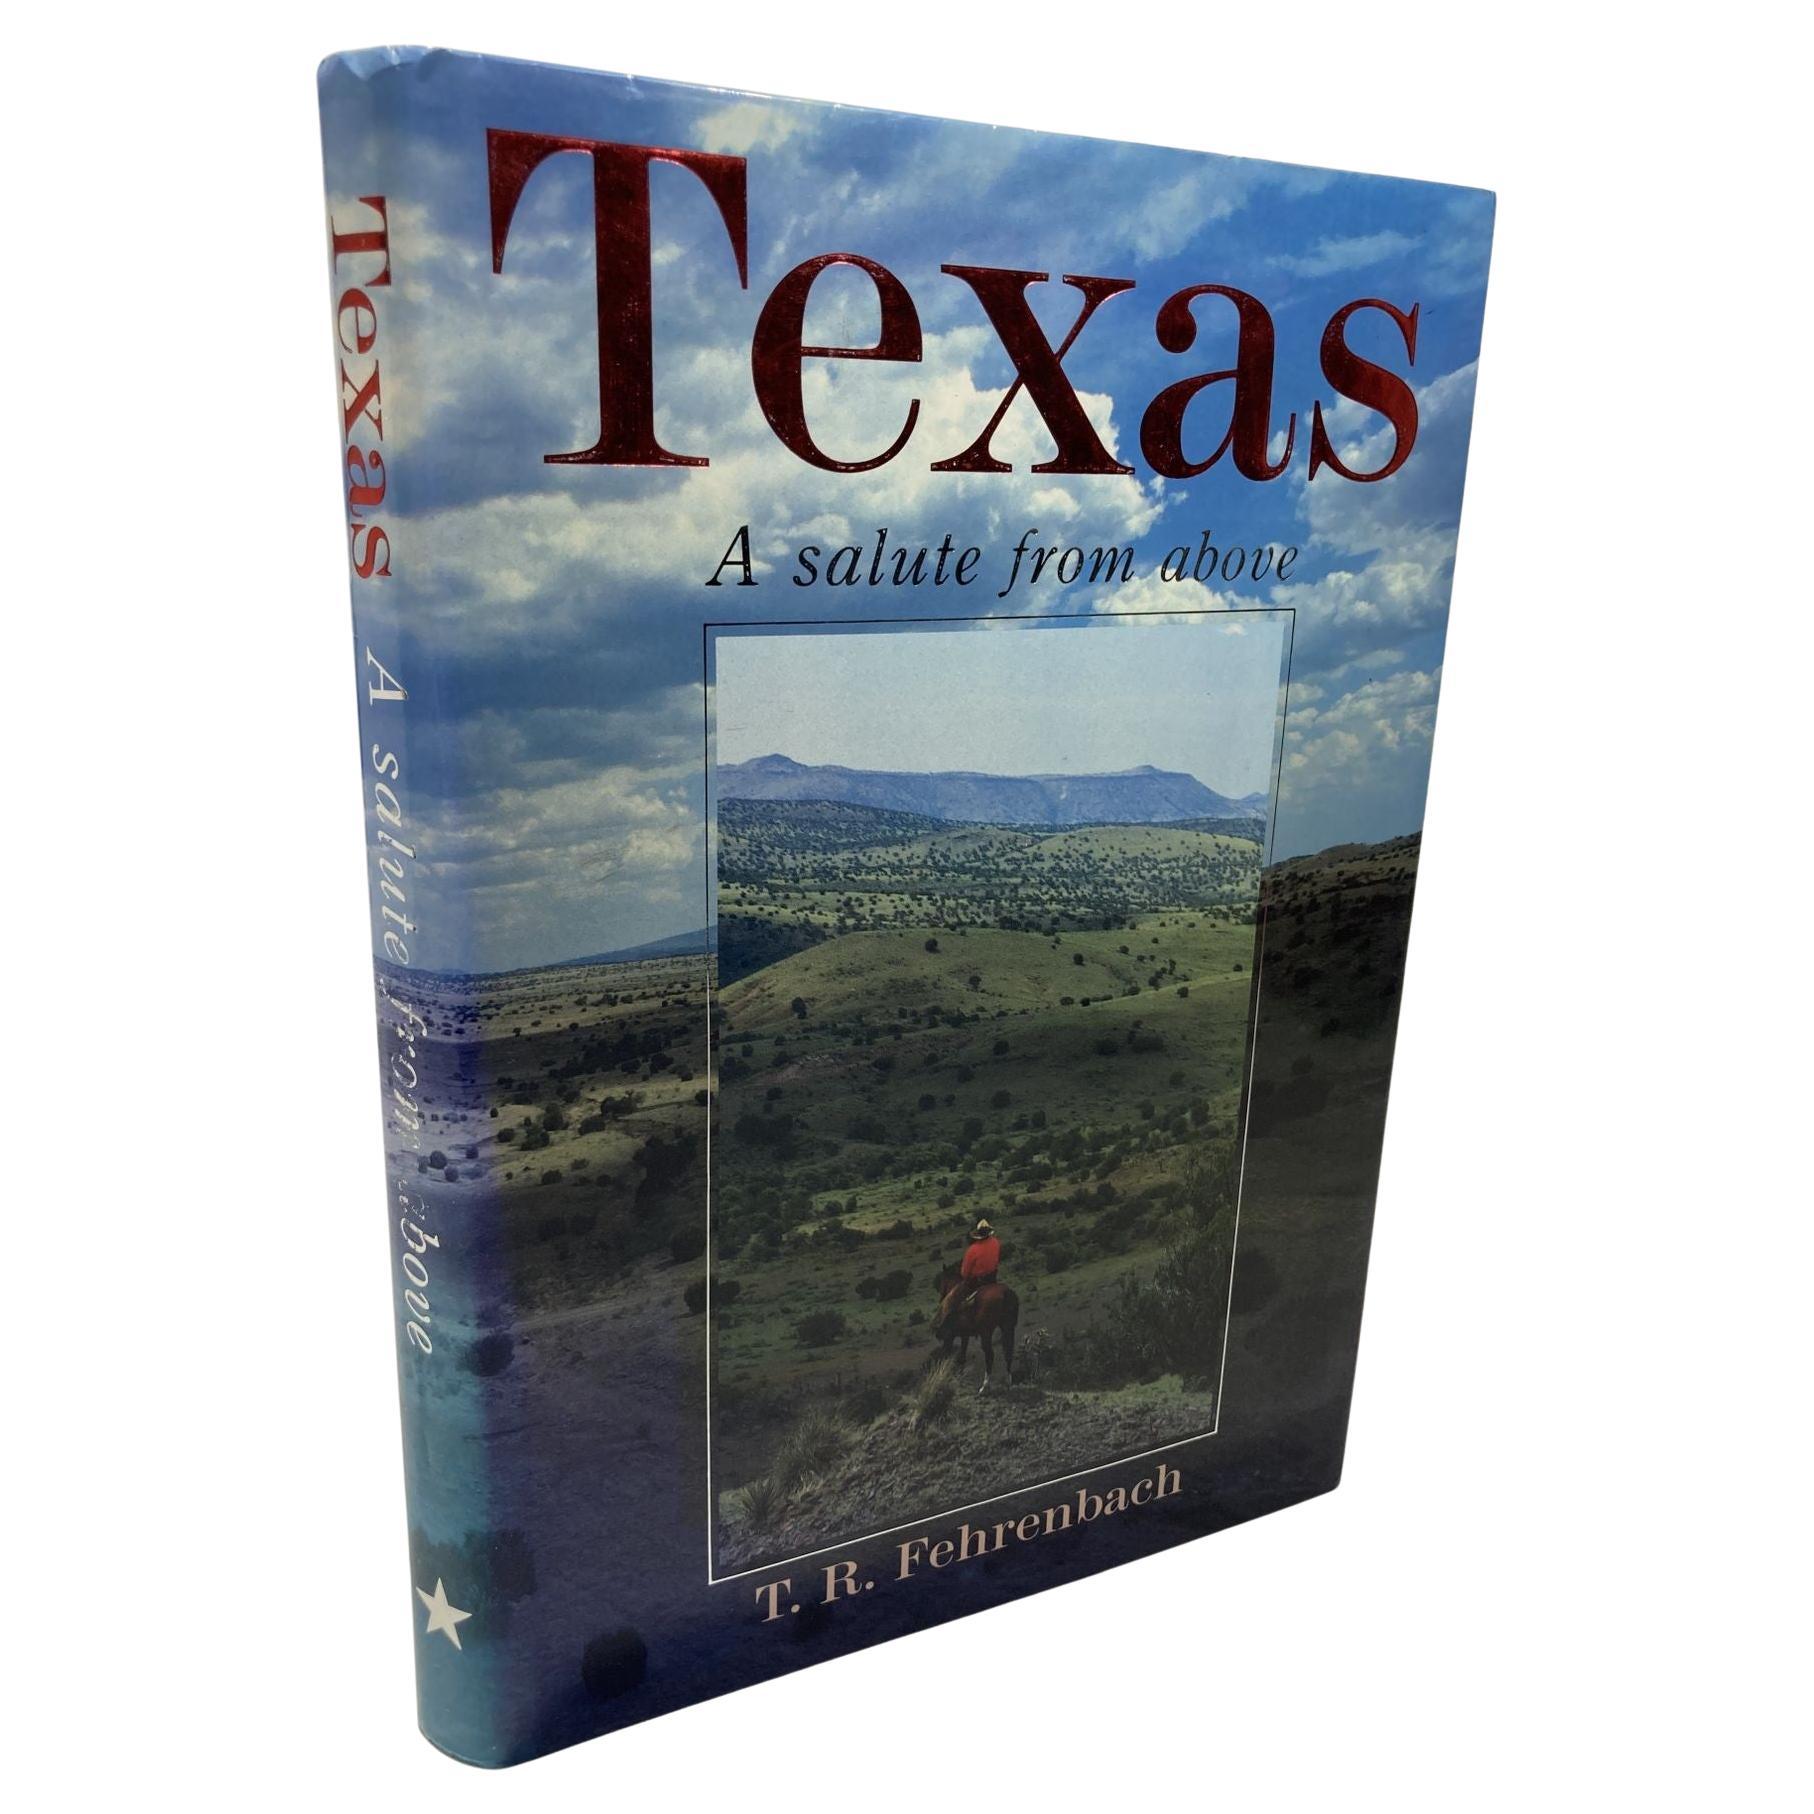 Texas a Salute from Above Fehrenbach, T. R 1985 For Sale